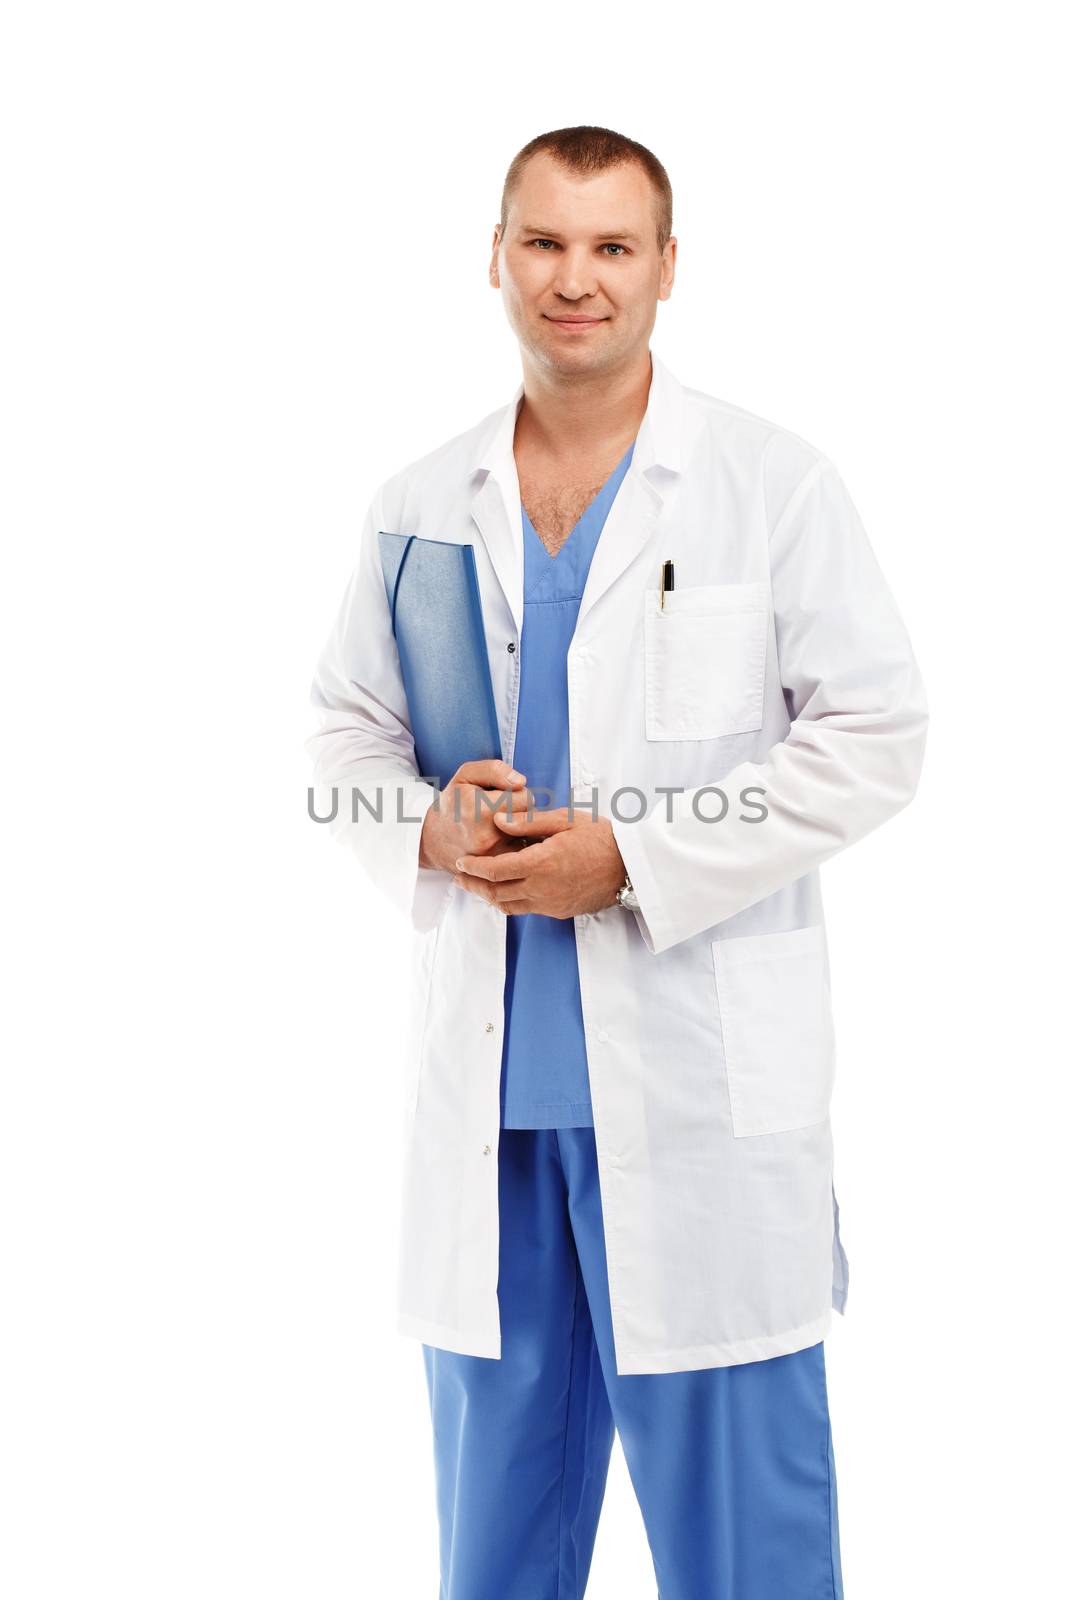 Portrait of a young male doctor in a white coat and blue scrubs against a white background